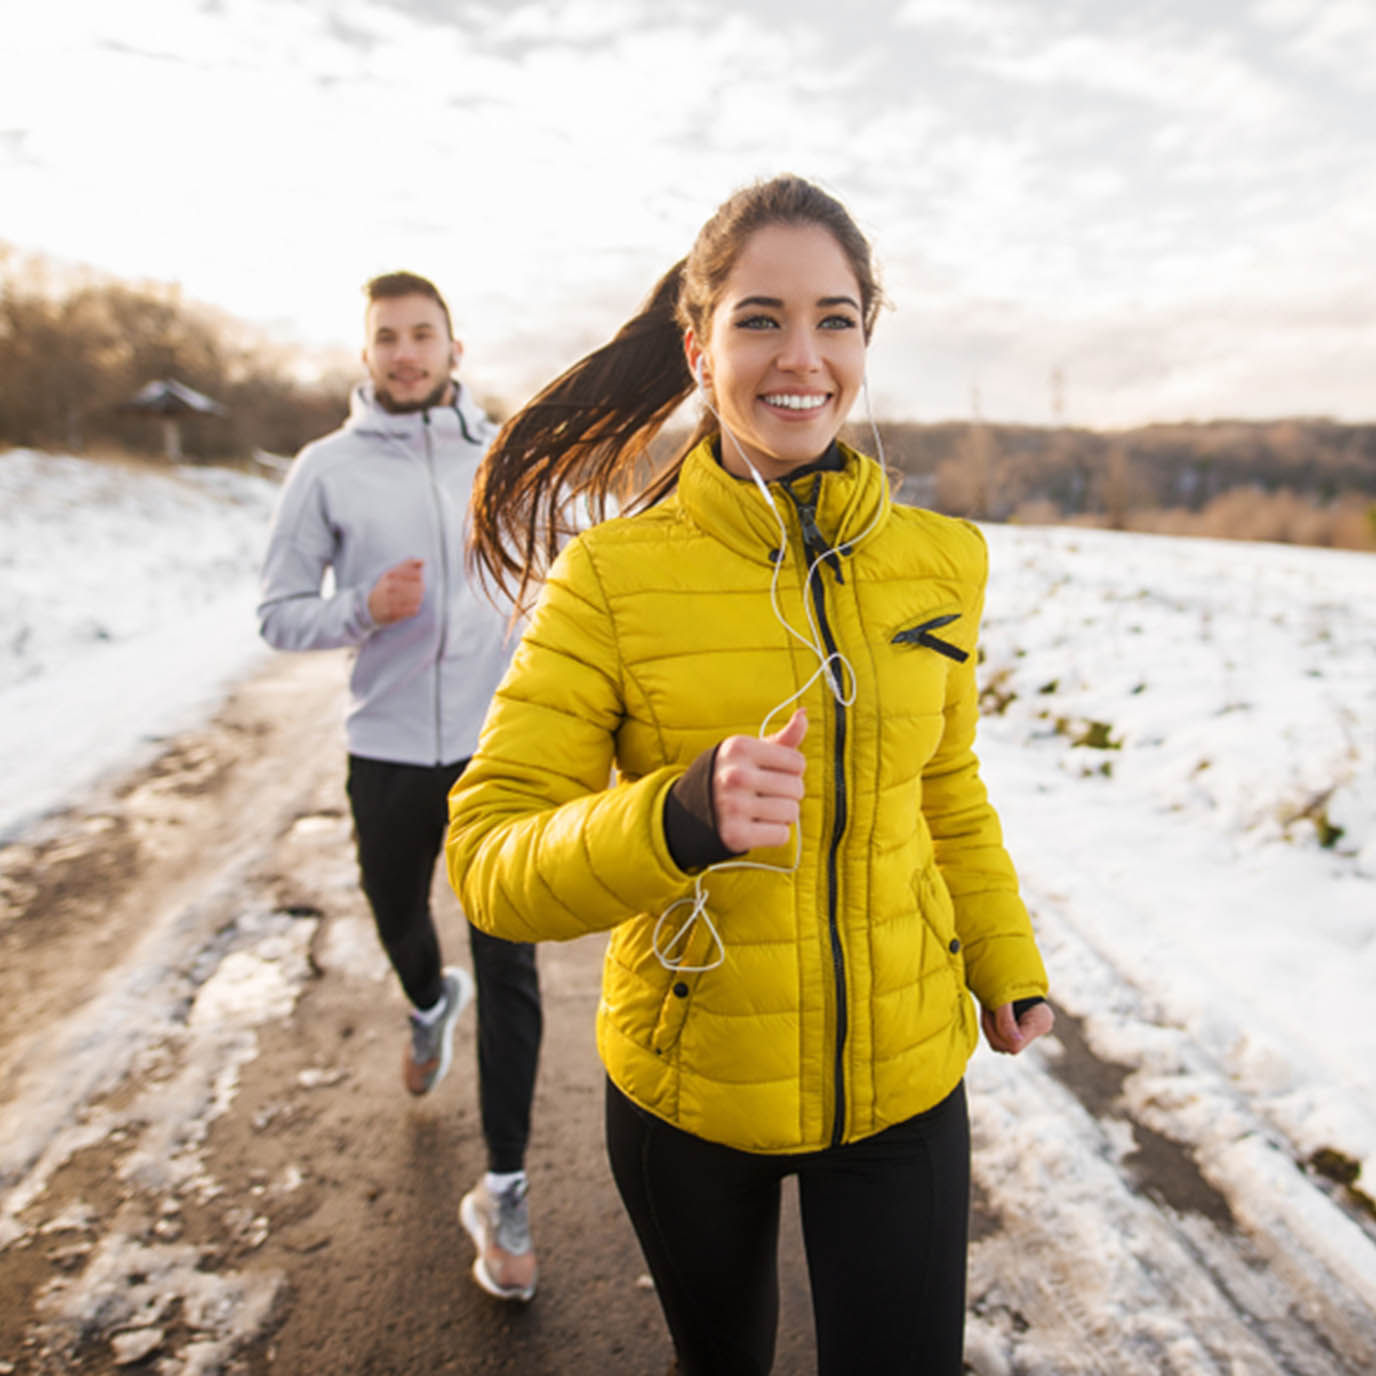 Find out how to winter-proof your exercise regime over the winter months